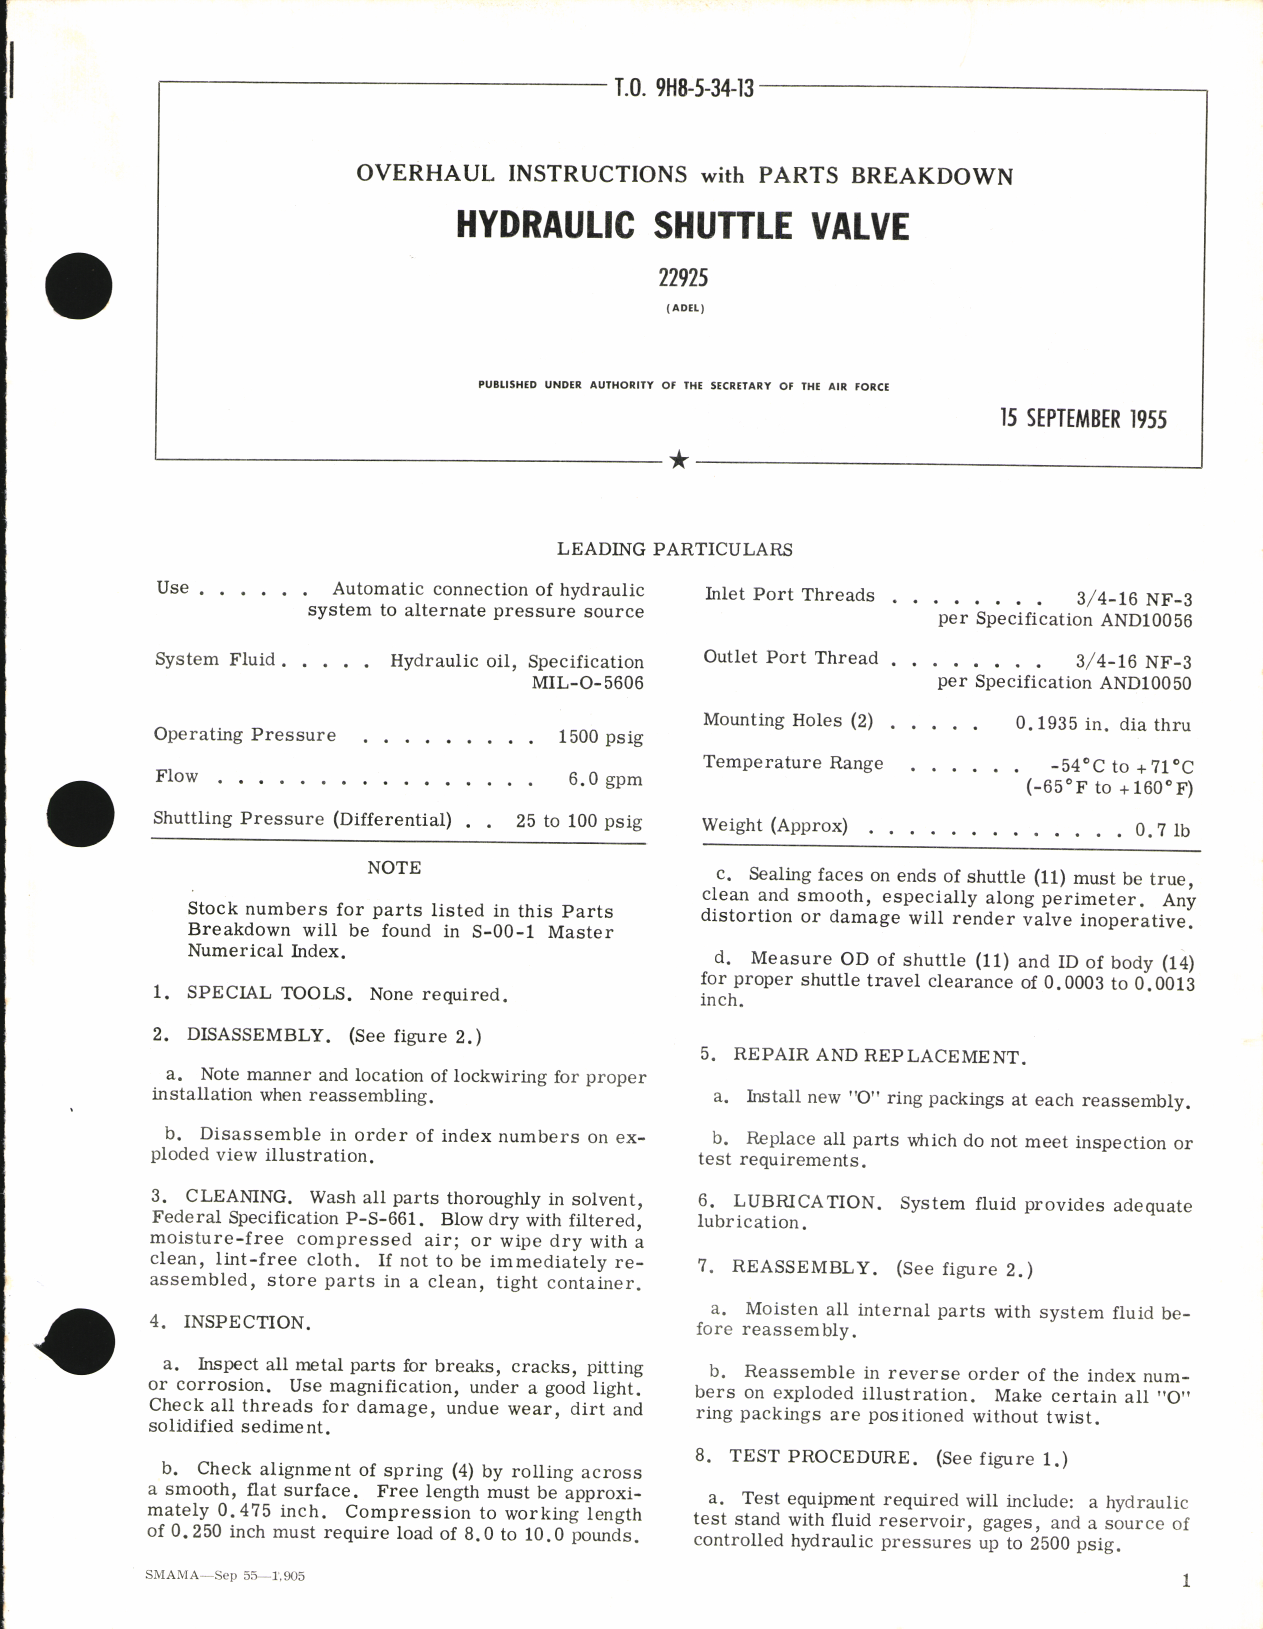 Sample page 1 from AirCorps Library document: Overhaul Instructions with Parts Breakdown for Hydraulic Shuttle Valve 22925